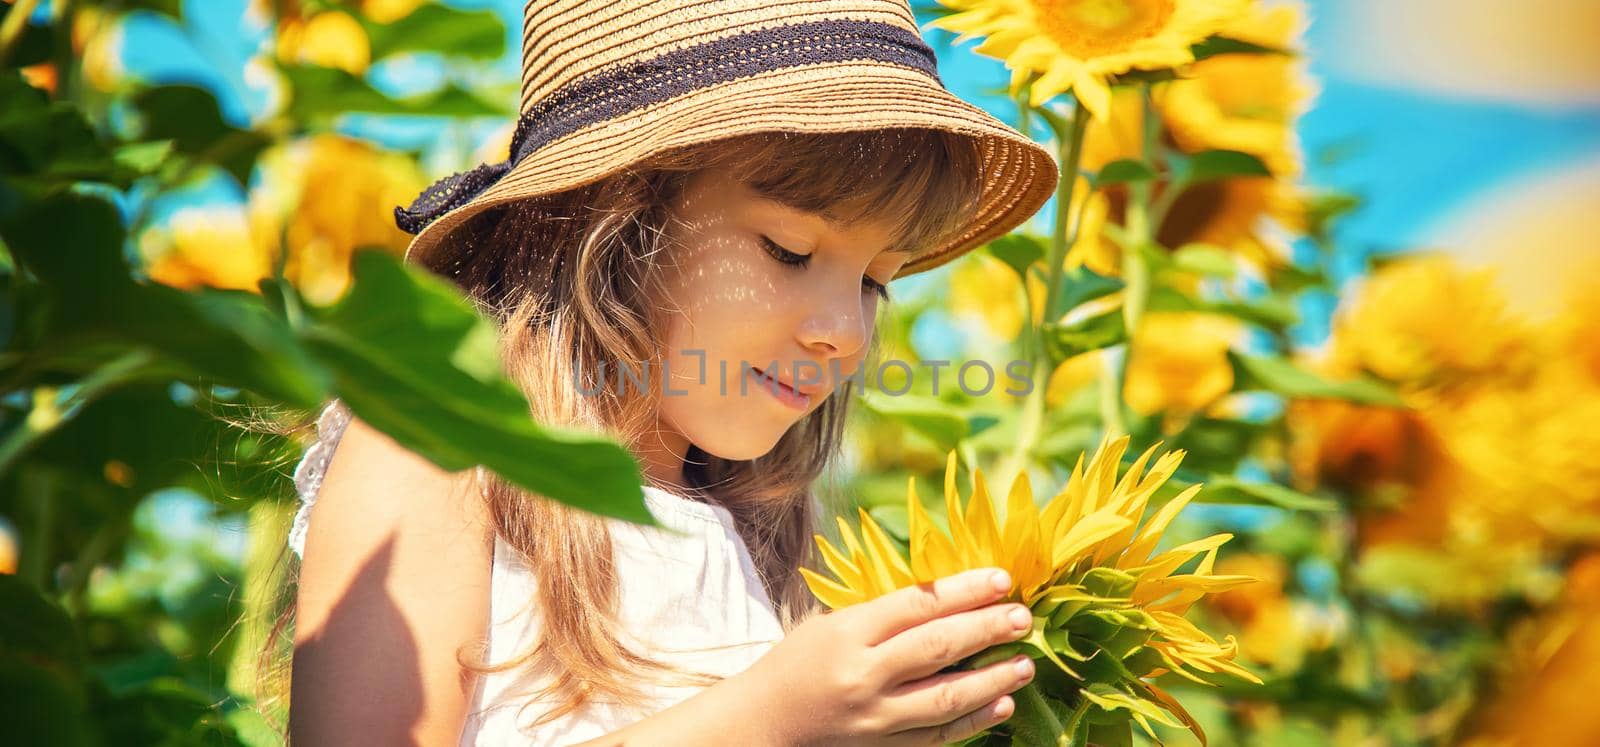 A child in a field of sunflowers. Selective focus. by yanadjana